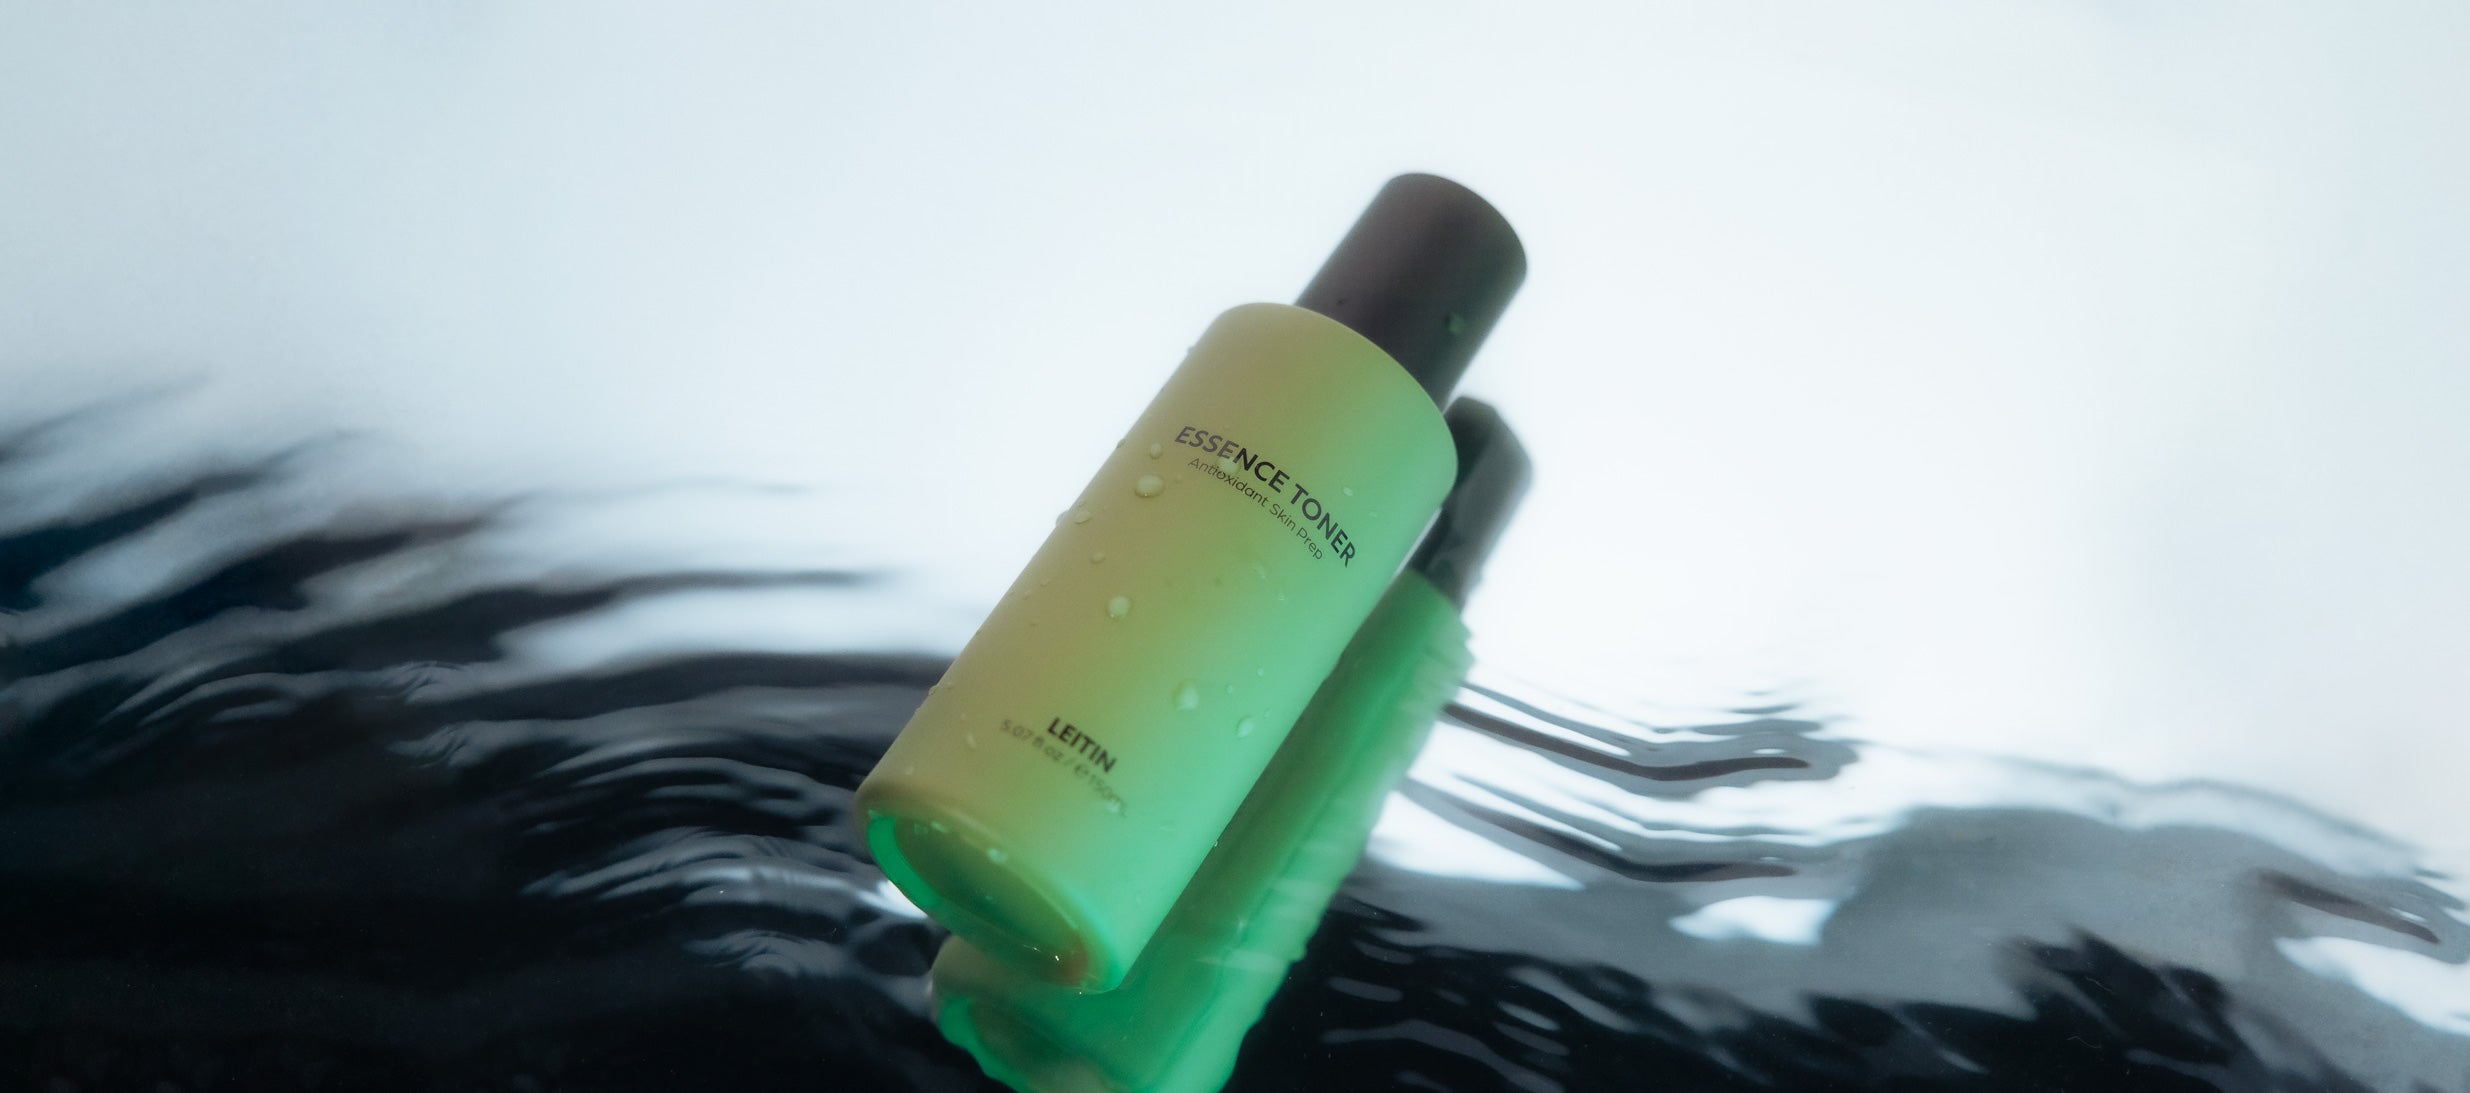 Editorial Image of LEITIN Skincare's Essence Toner in shimmery water